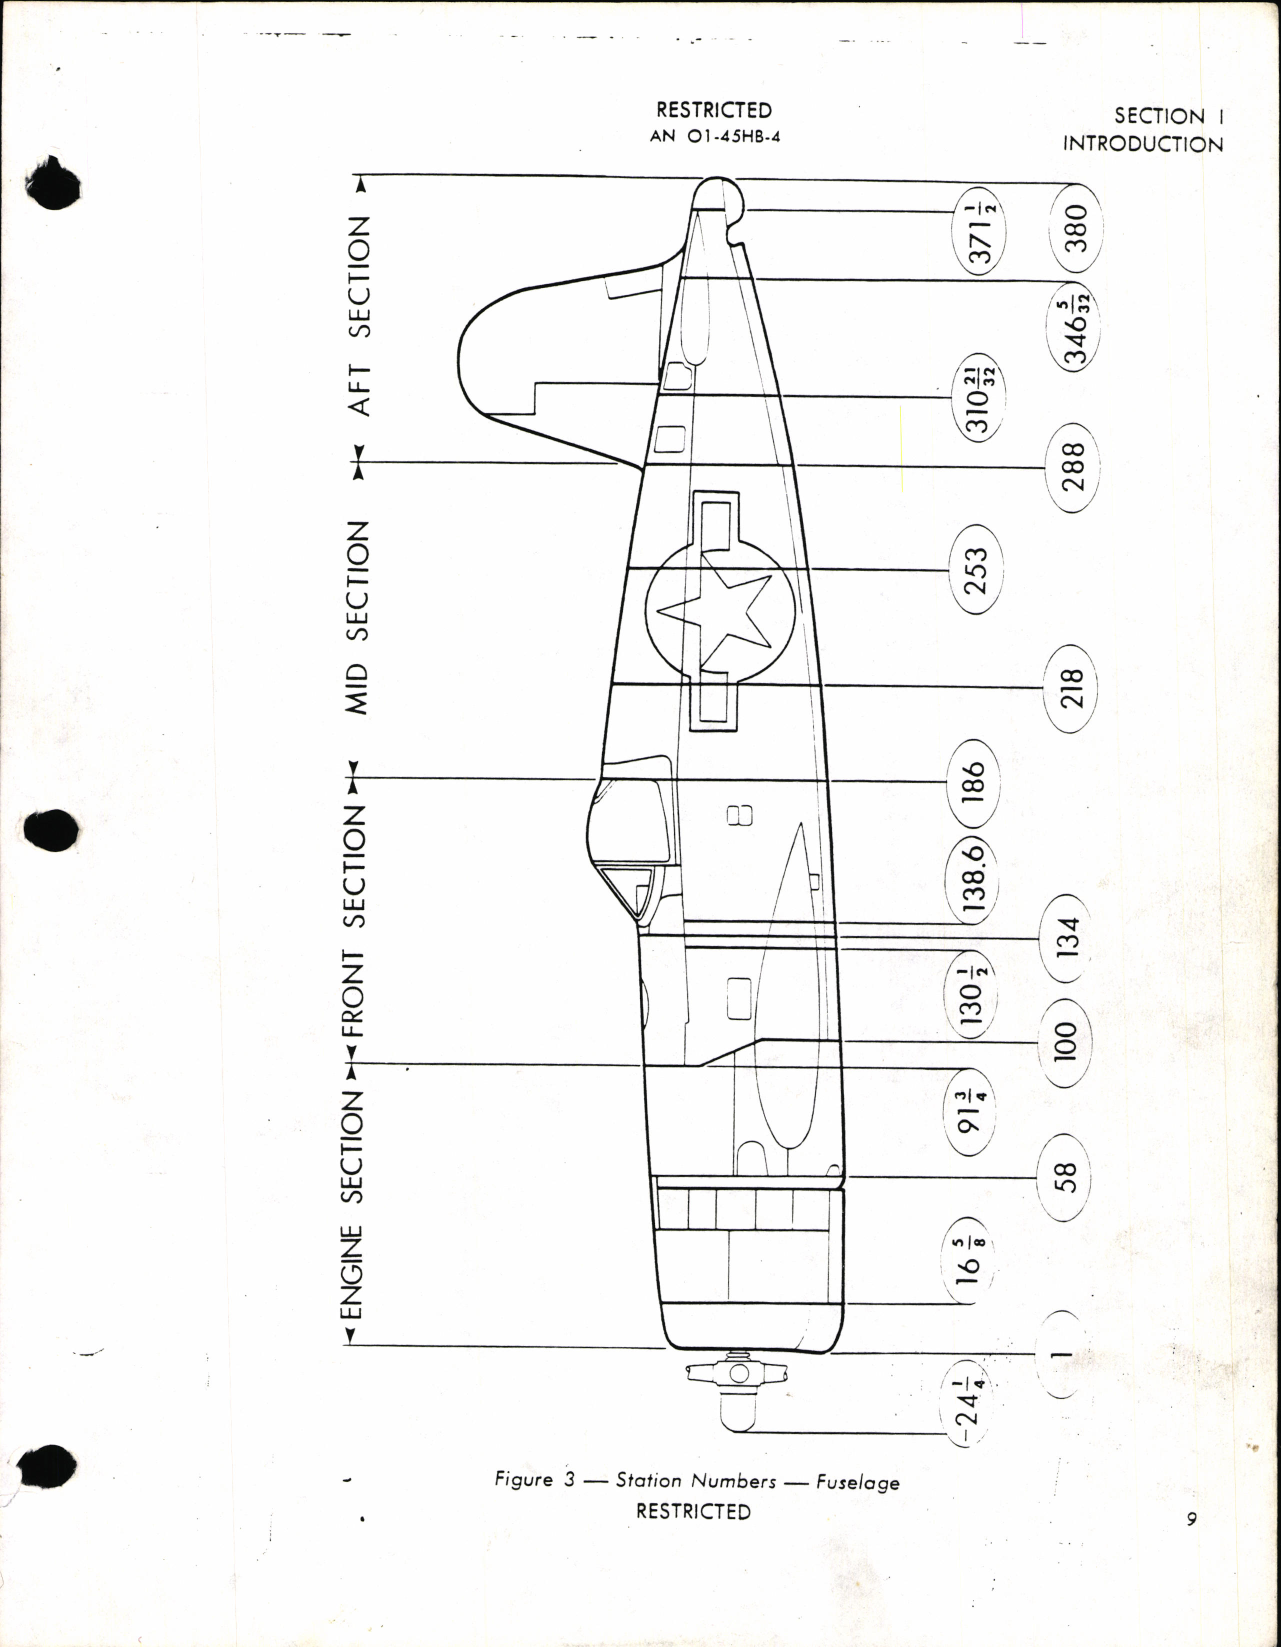 Sample page 17 from AirCorps Library document: Parts Catalog for F4U-4 and F4U-4B Airplanes